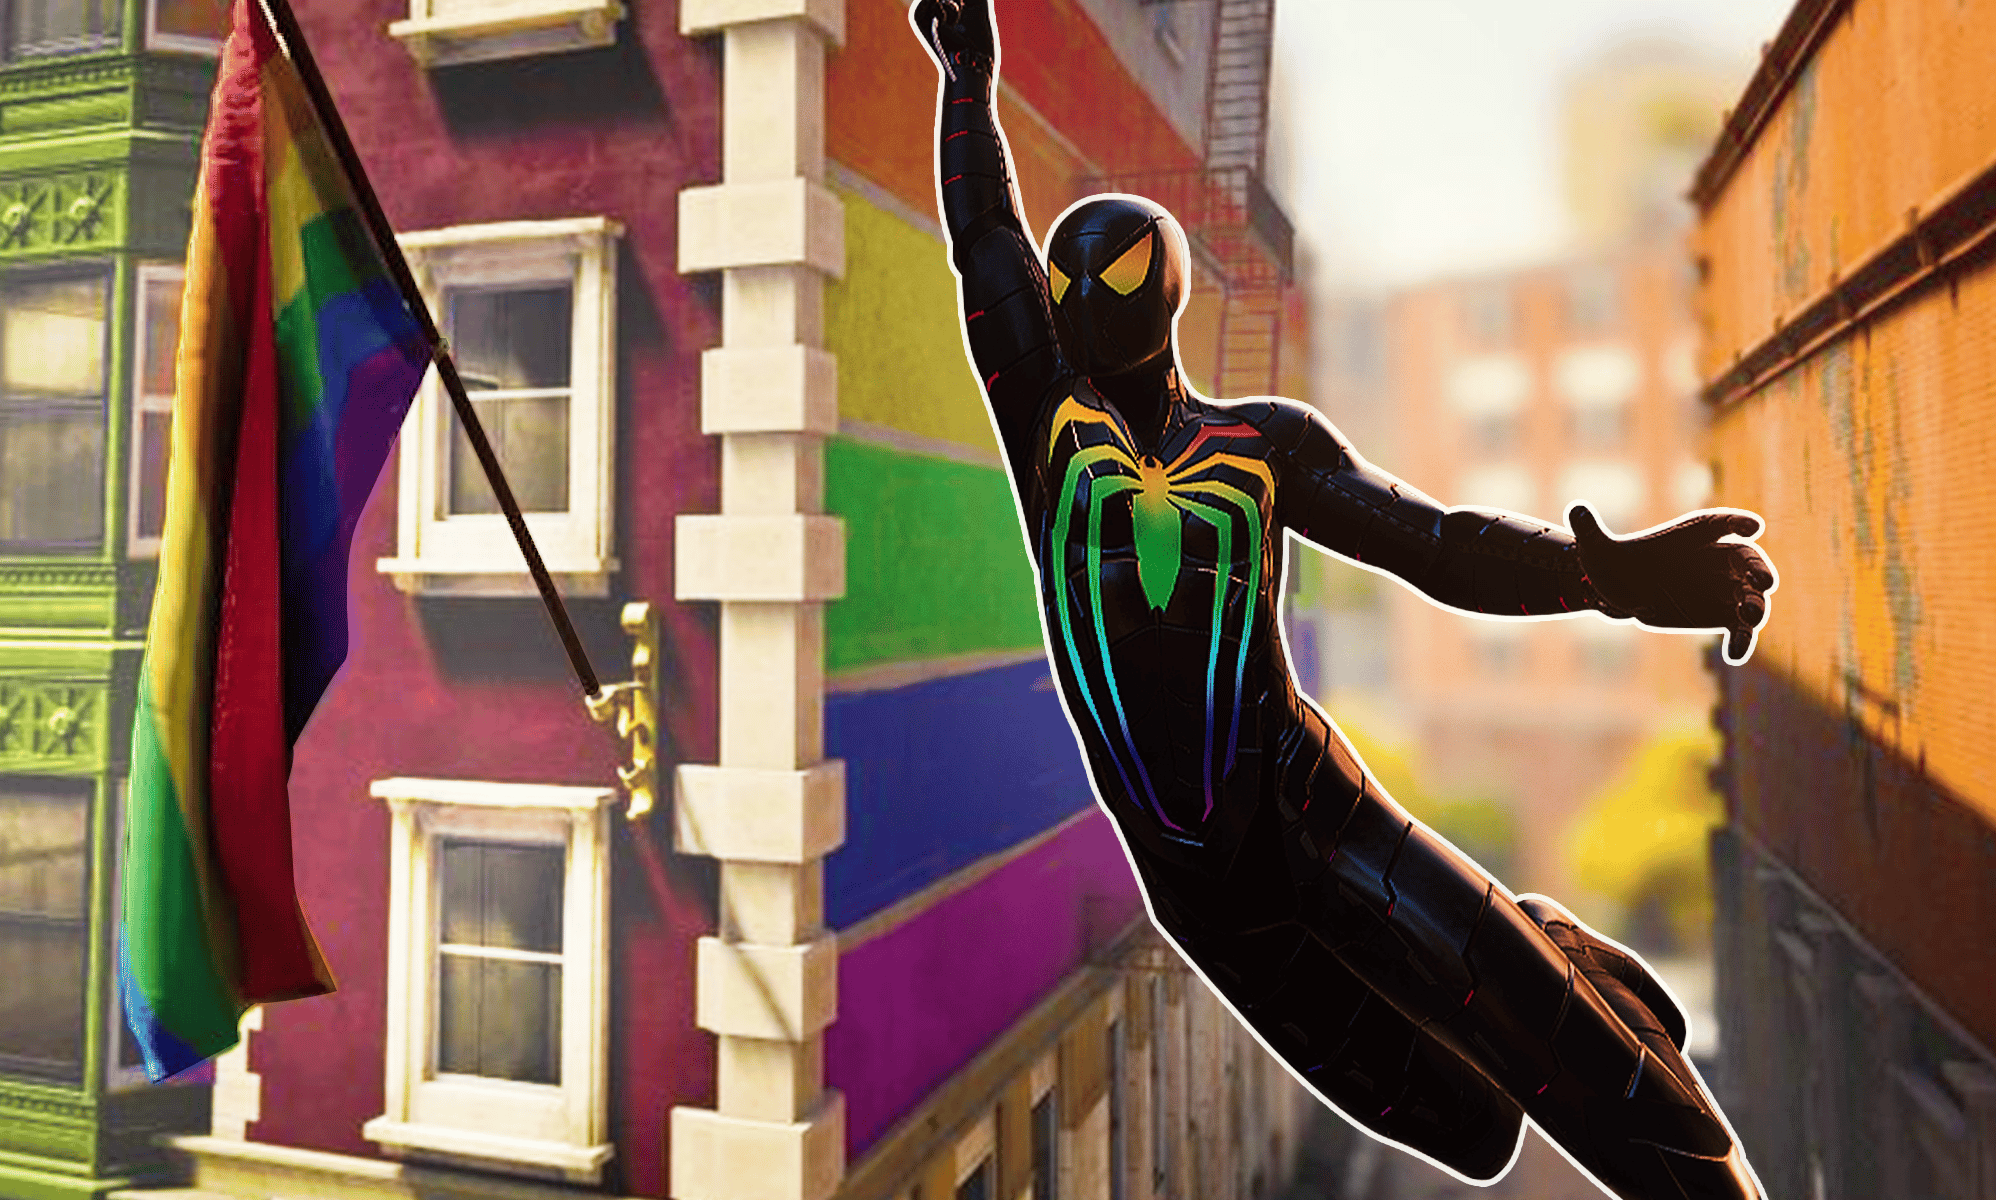 Community Flags Marvel's Spider-Man 2 as “Another Broken Release